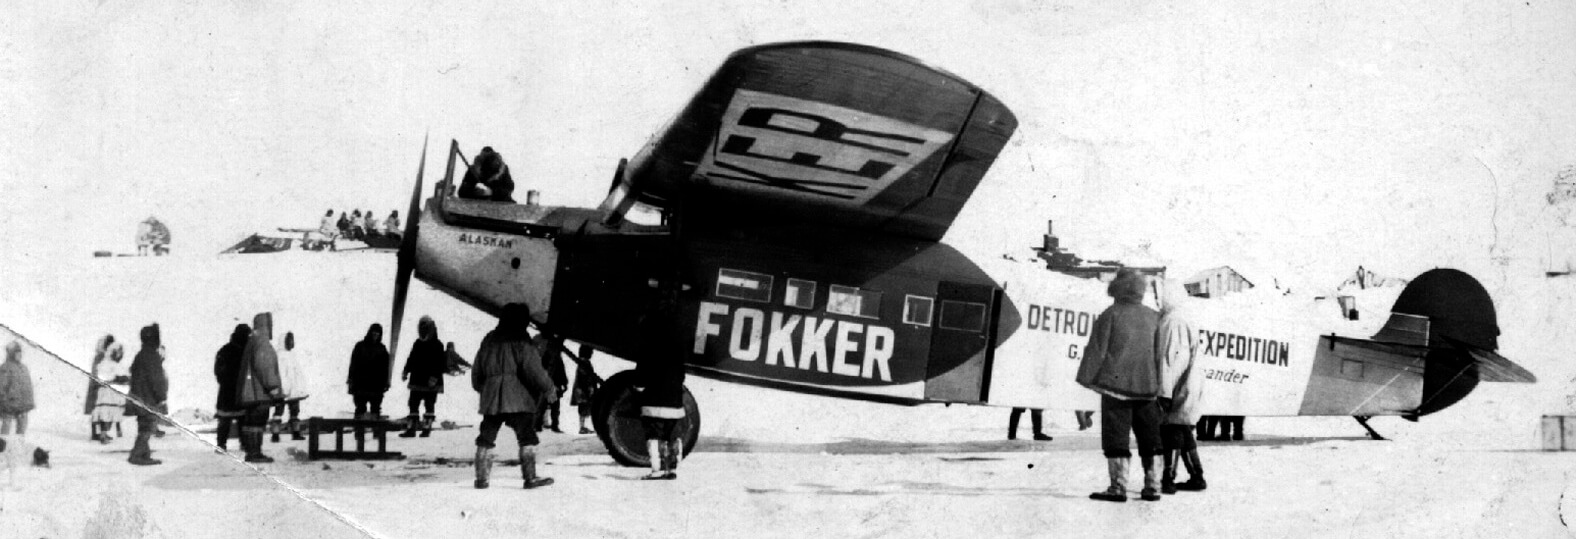 1926: The Alaskan ready to take off on the Wilkins-Arctic Detroit Mission